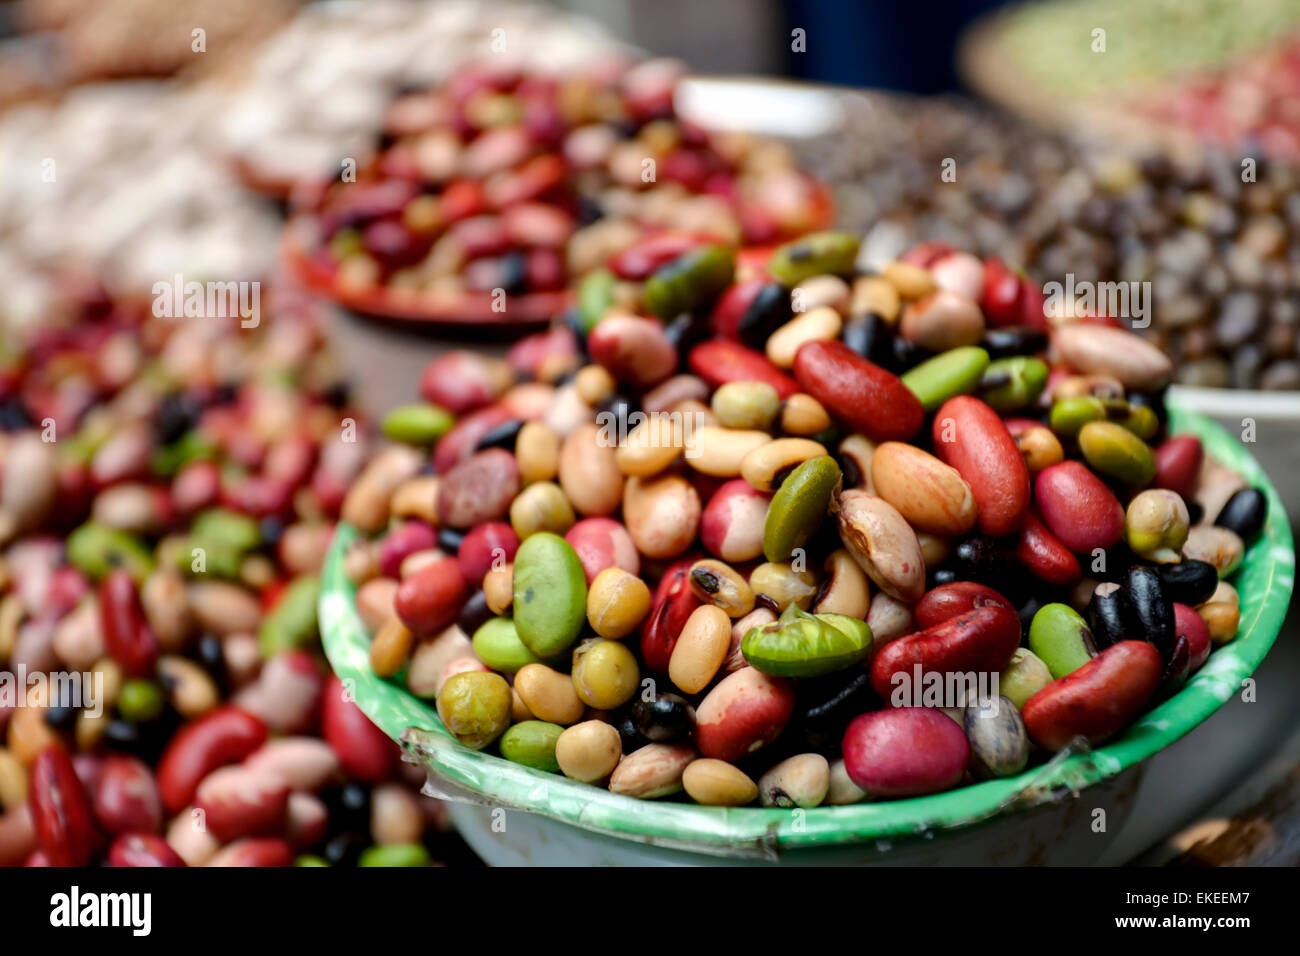 Group of beans and lentils Stock Photo